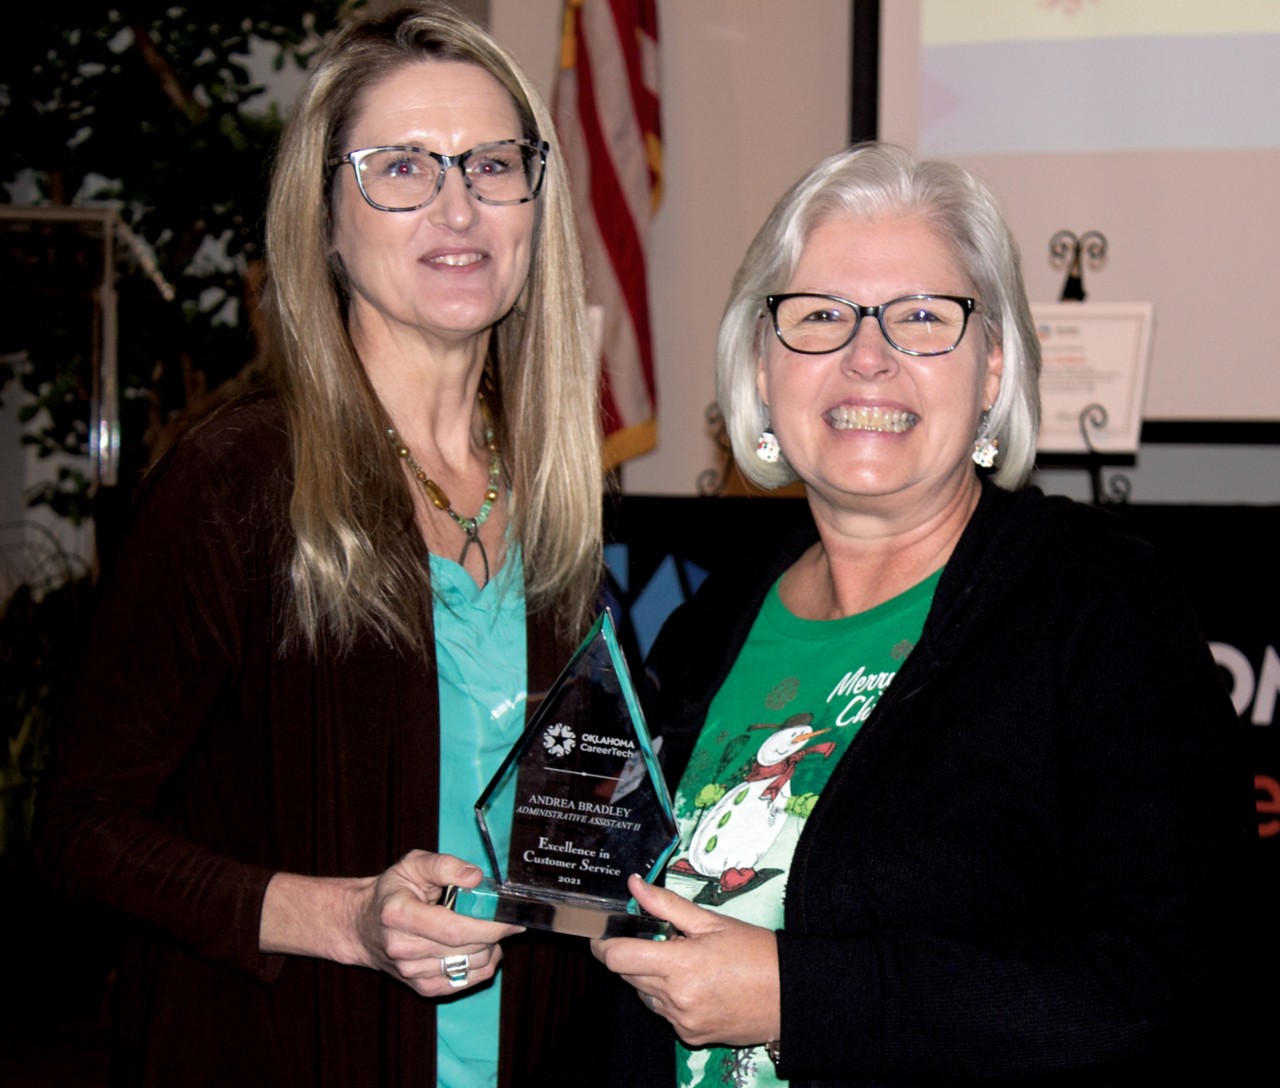 Andrea Bradley, right, received an Excellence in Customer Service Pinnacle Award. With her is Oklahoma CareerTech State Director Marcie Mack.